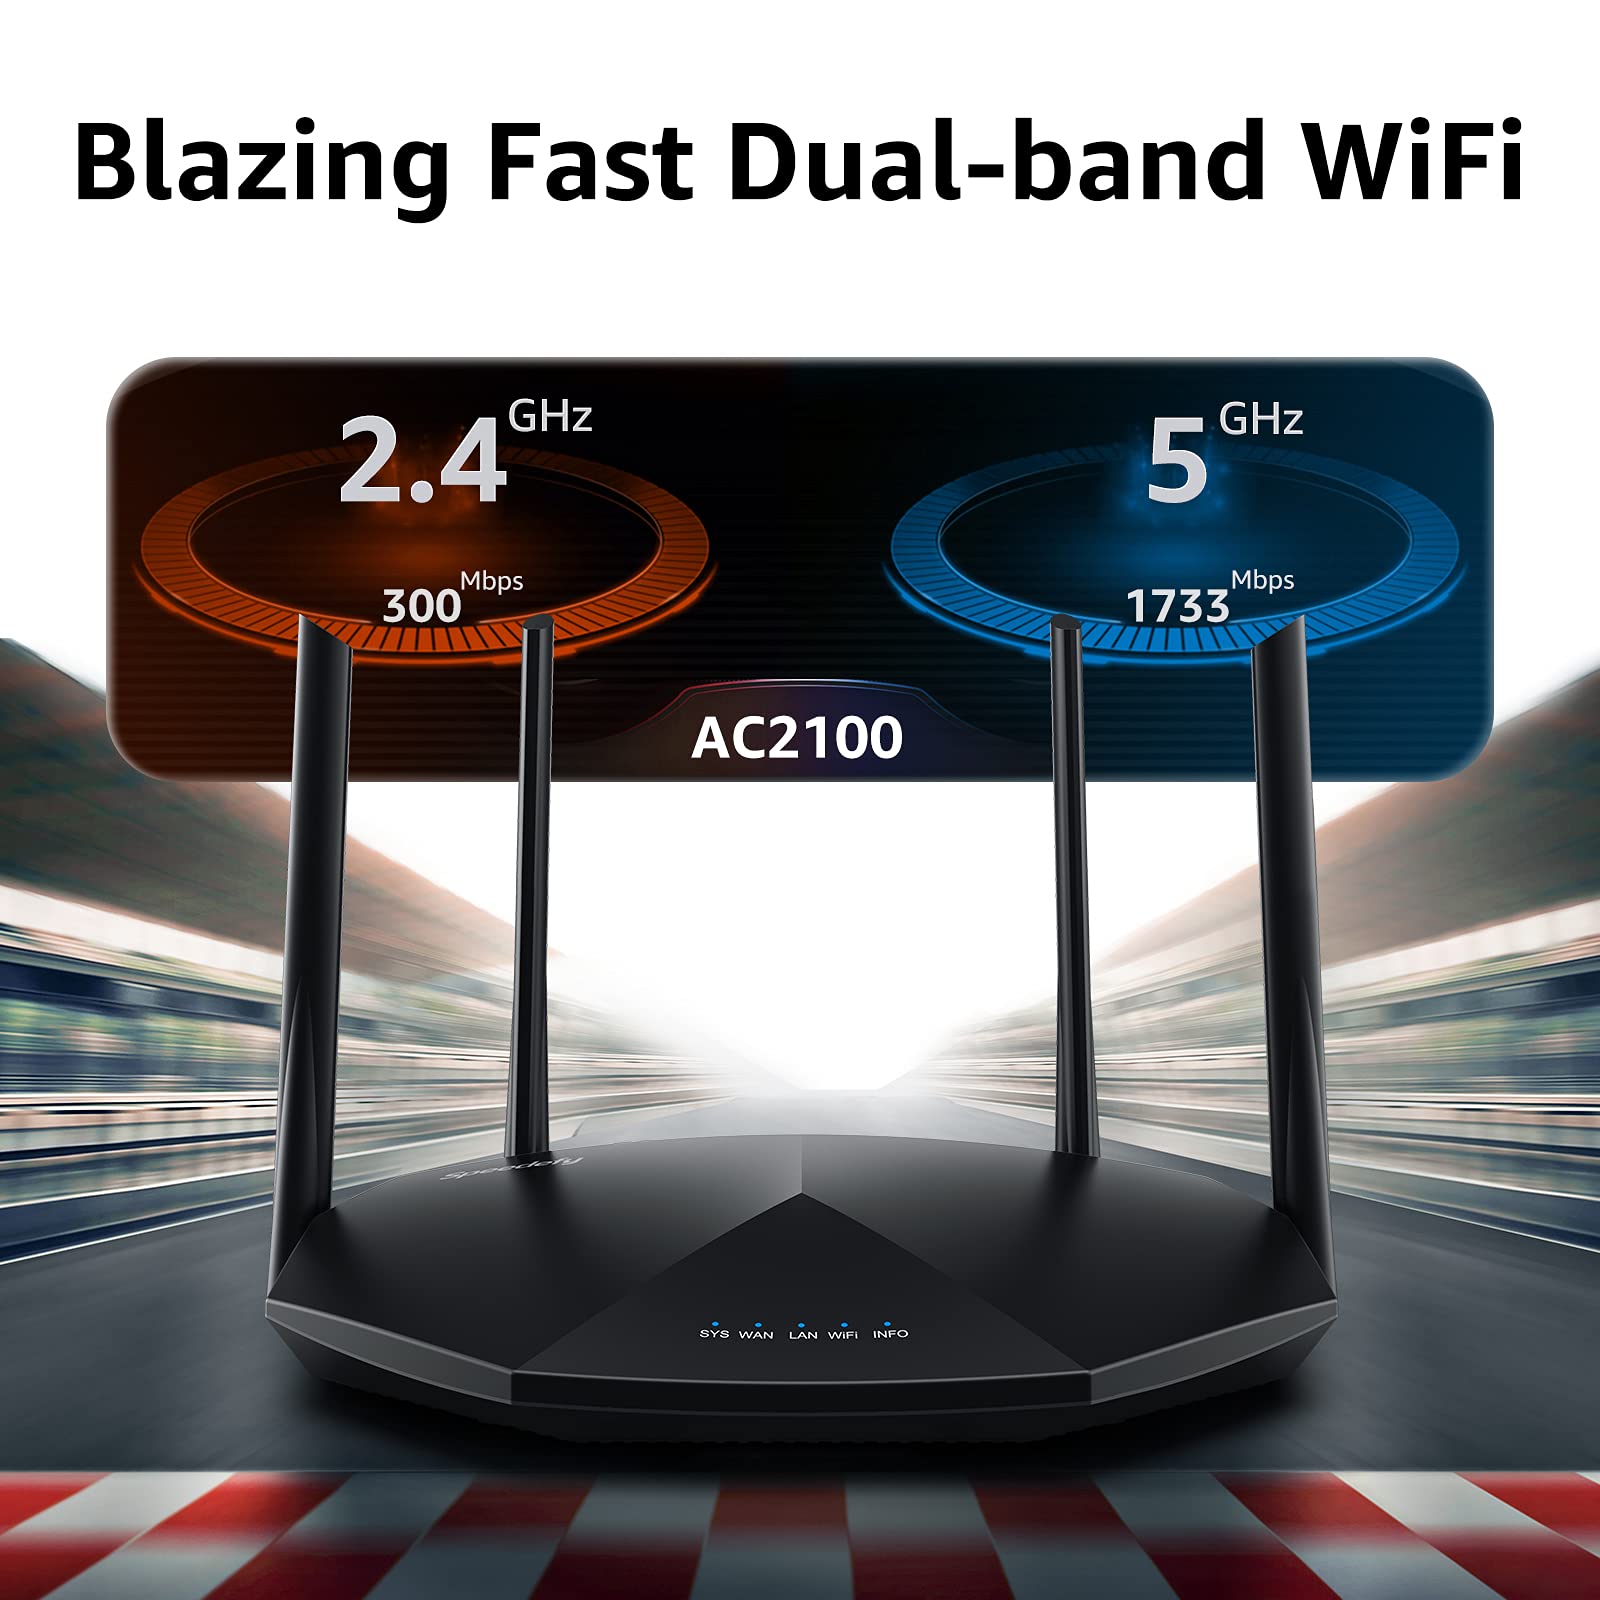 Speedefy High Speed Pro WiFi Router - Dual Band AC2100 Wireless Router for Streaming & Gaming, Up to 35 Devices, 2000 sq.ft Coverage, 4X4 MU-MIMO, USB Port, Parental Control (Model: K8)